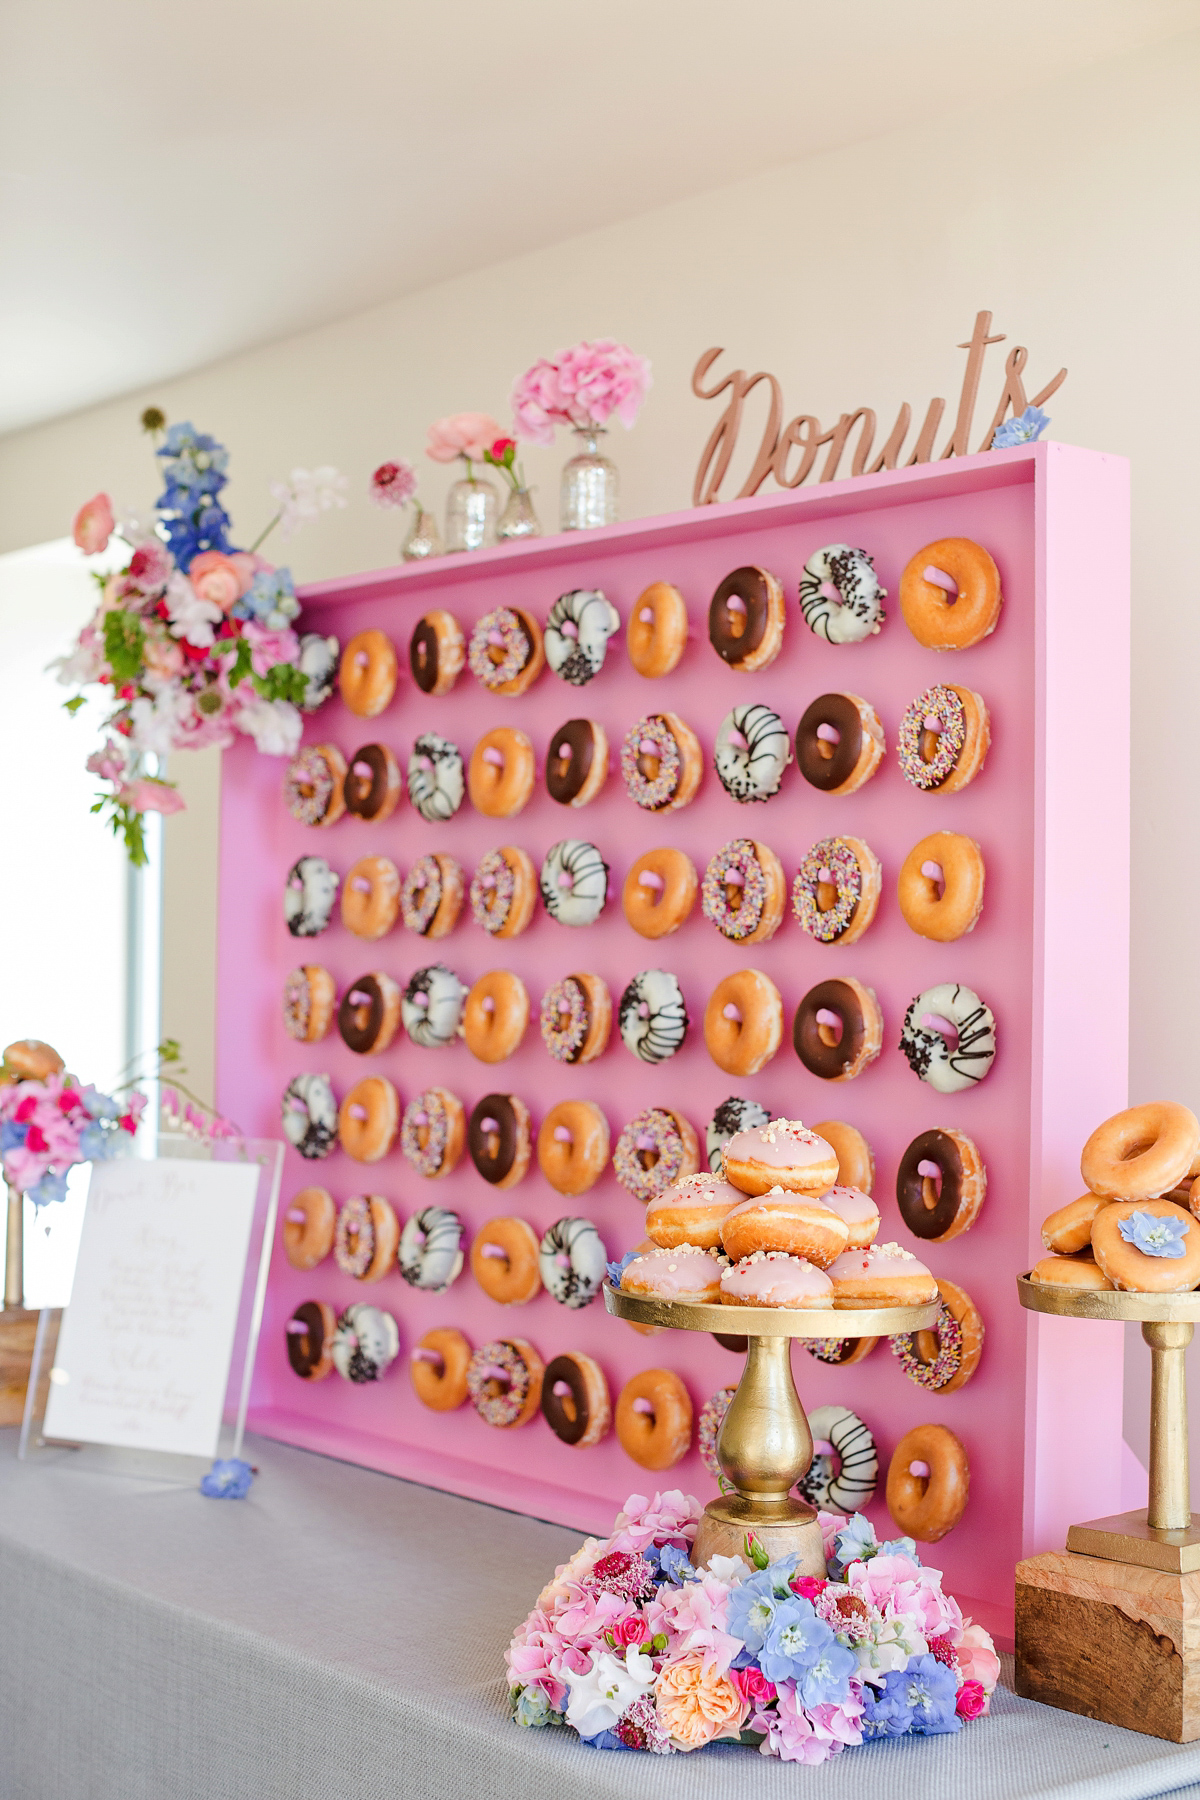 Donut walls and Liquid Nitrogen Ice cream bars! Kalm Kitchen are a brilliant catering company that we recommend through our littlebookforbrides.com. Here they demonstrate some of their creative catering ideas.